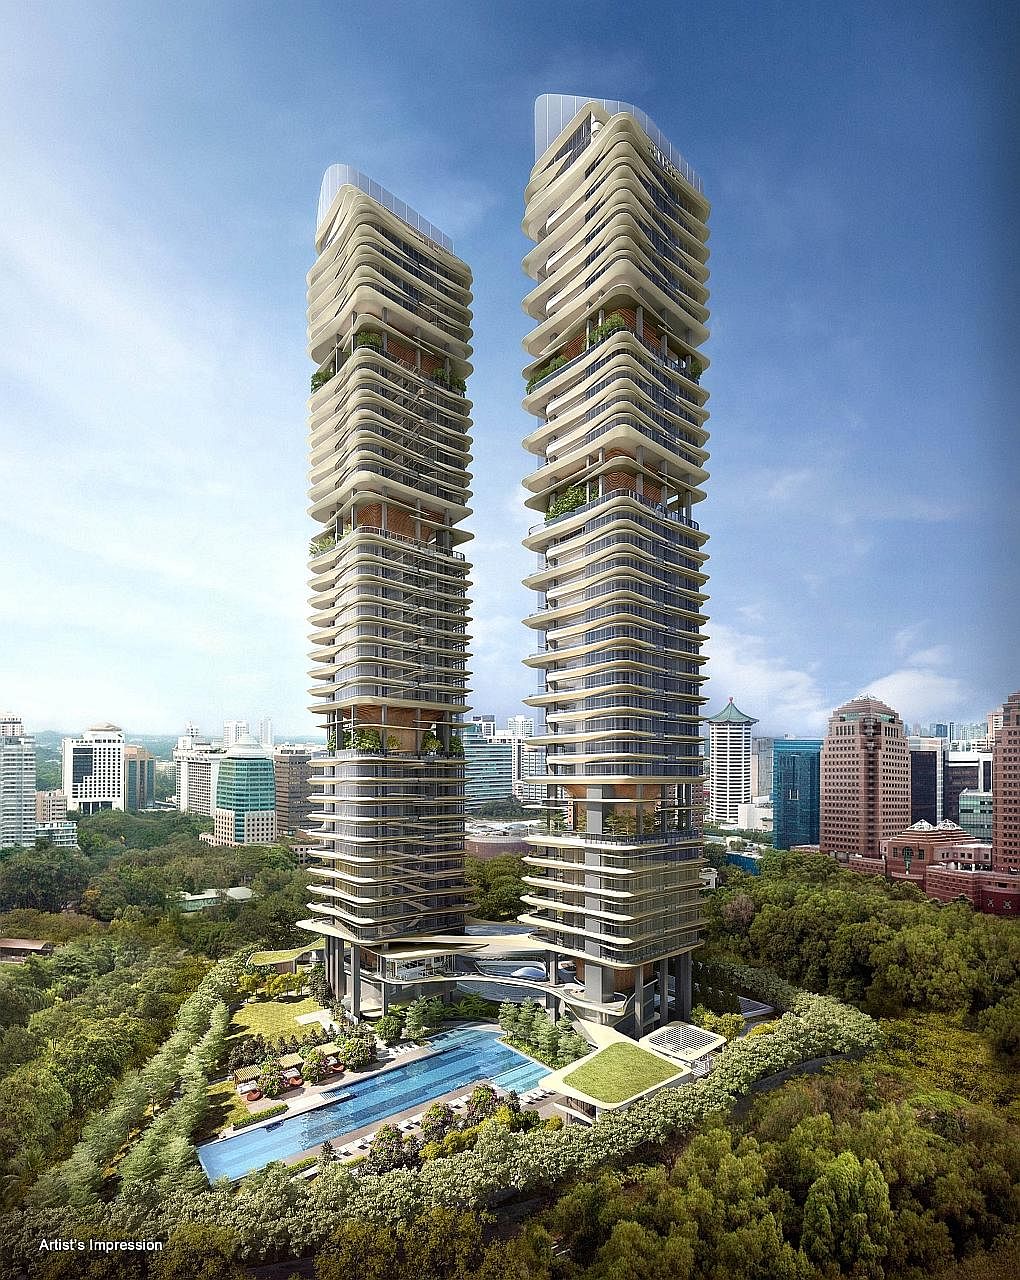 Condominiums Martin Modern (left) and New Futura are slated to hit the market in the second half of the year.